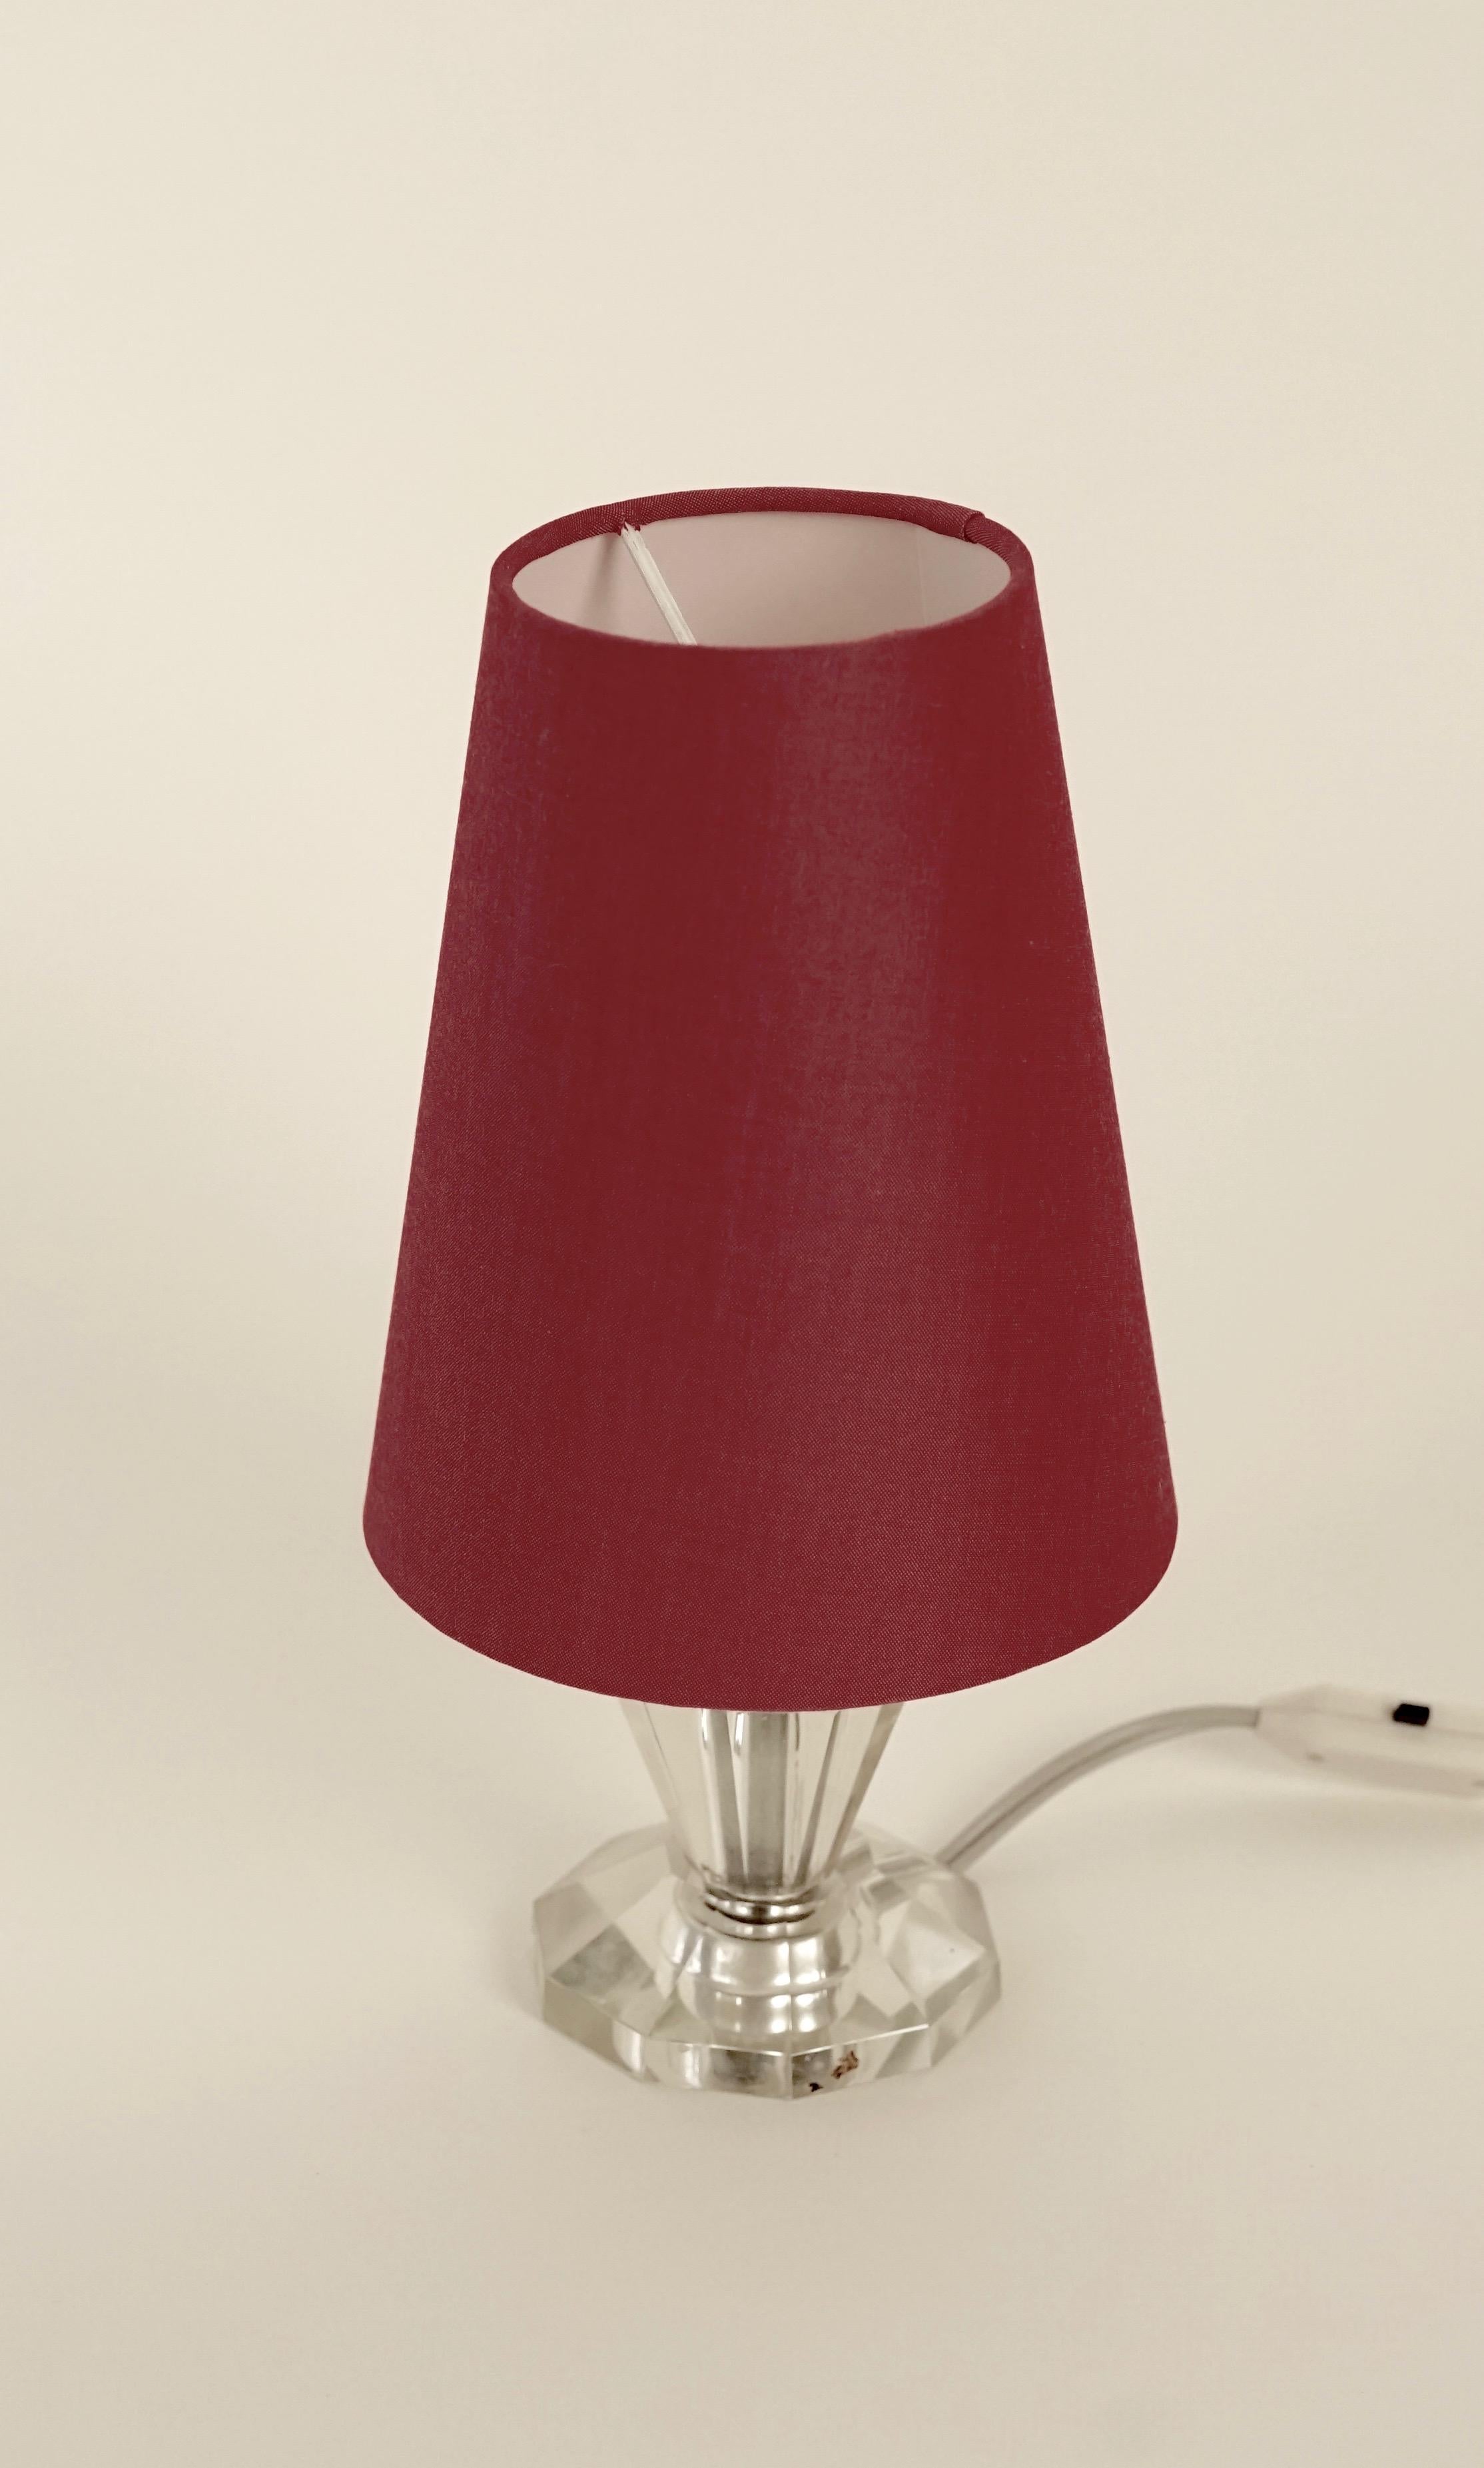 Cute small table lamp with a cut glass base, made in France.
The shade is new, made in coral colored silk.
This is a very feminine lamp, charming for a vanity unit or a night table.